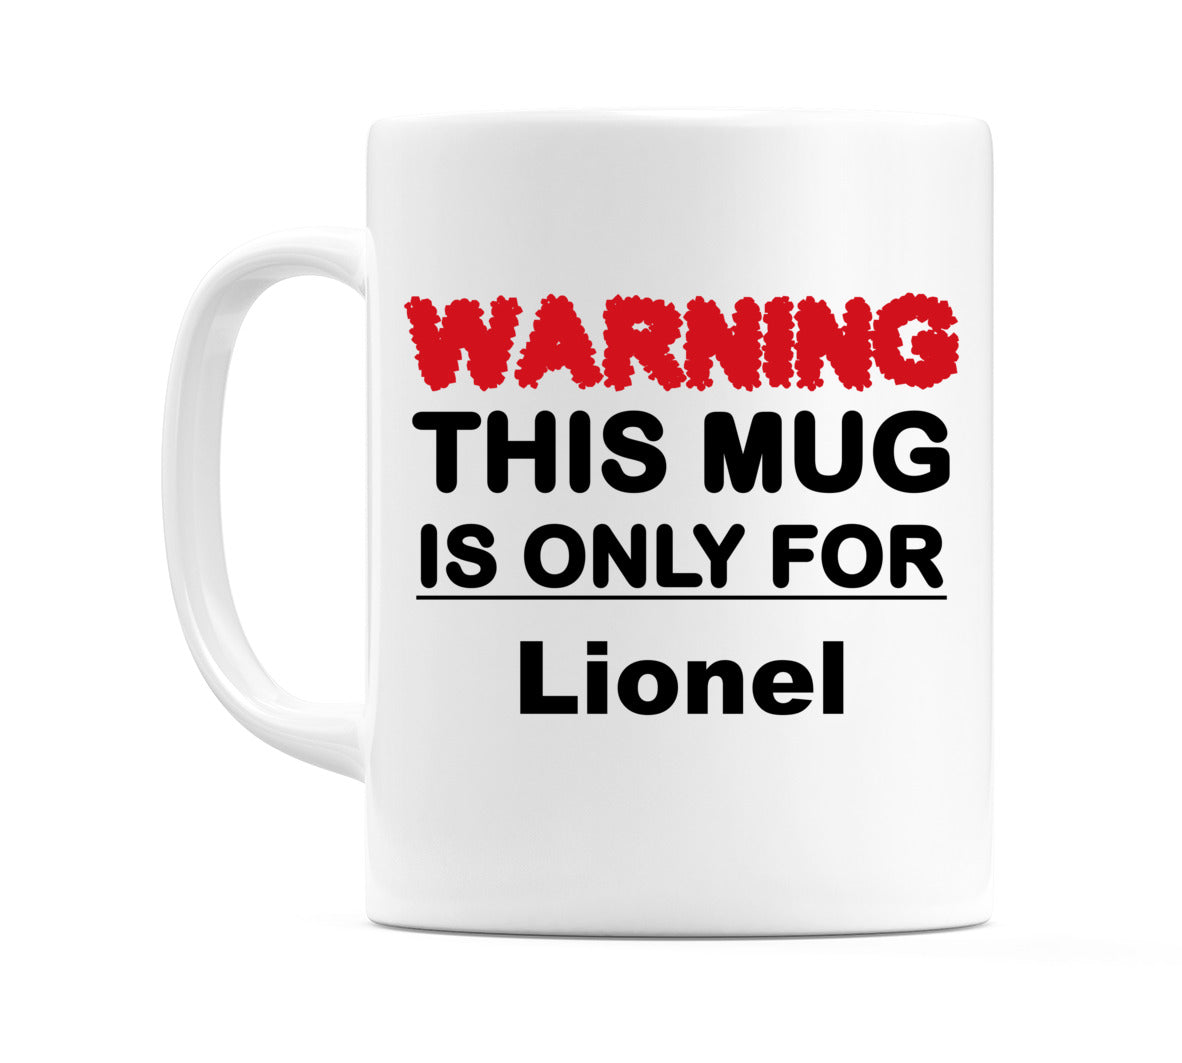 Warning This Mug is ONLY for Lionel Mug